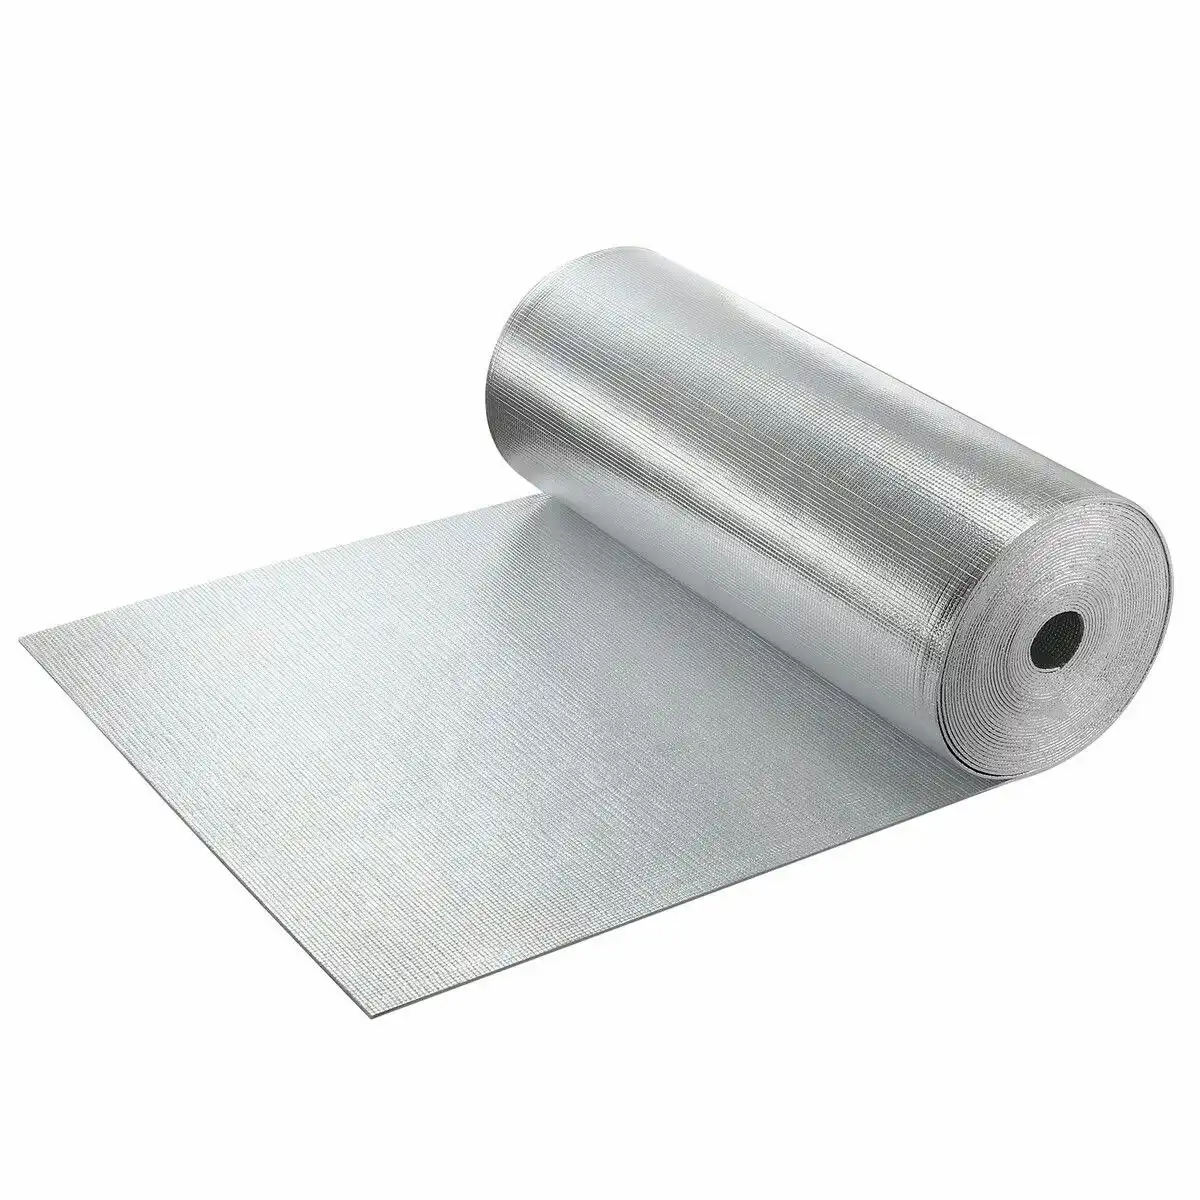 Ausway Foil Heat Barrier Shield Reflective Radiant Cell Insulation Rolls Roofing Aluminium XPE 90x1112cm 10sq m Ceiling Attic Loft Wall Window